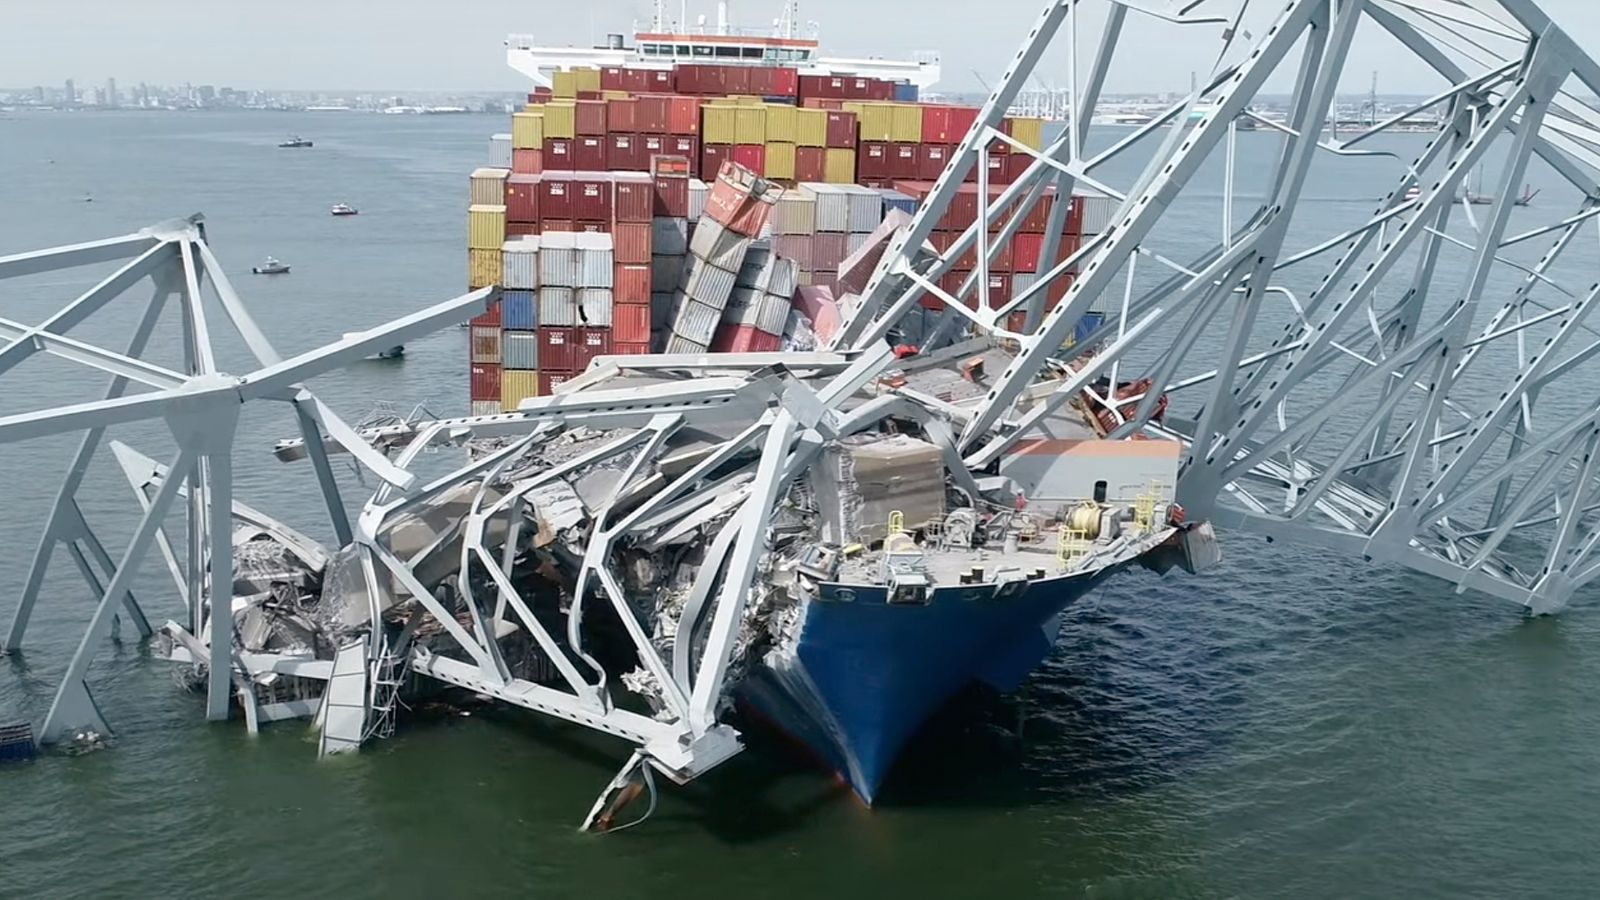 baltimore has 'long road ahead' after bridge disaster - as update given on ship crew